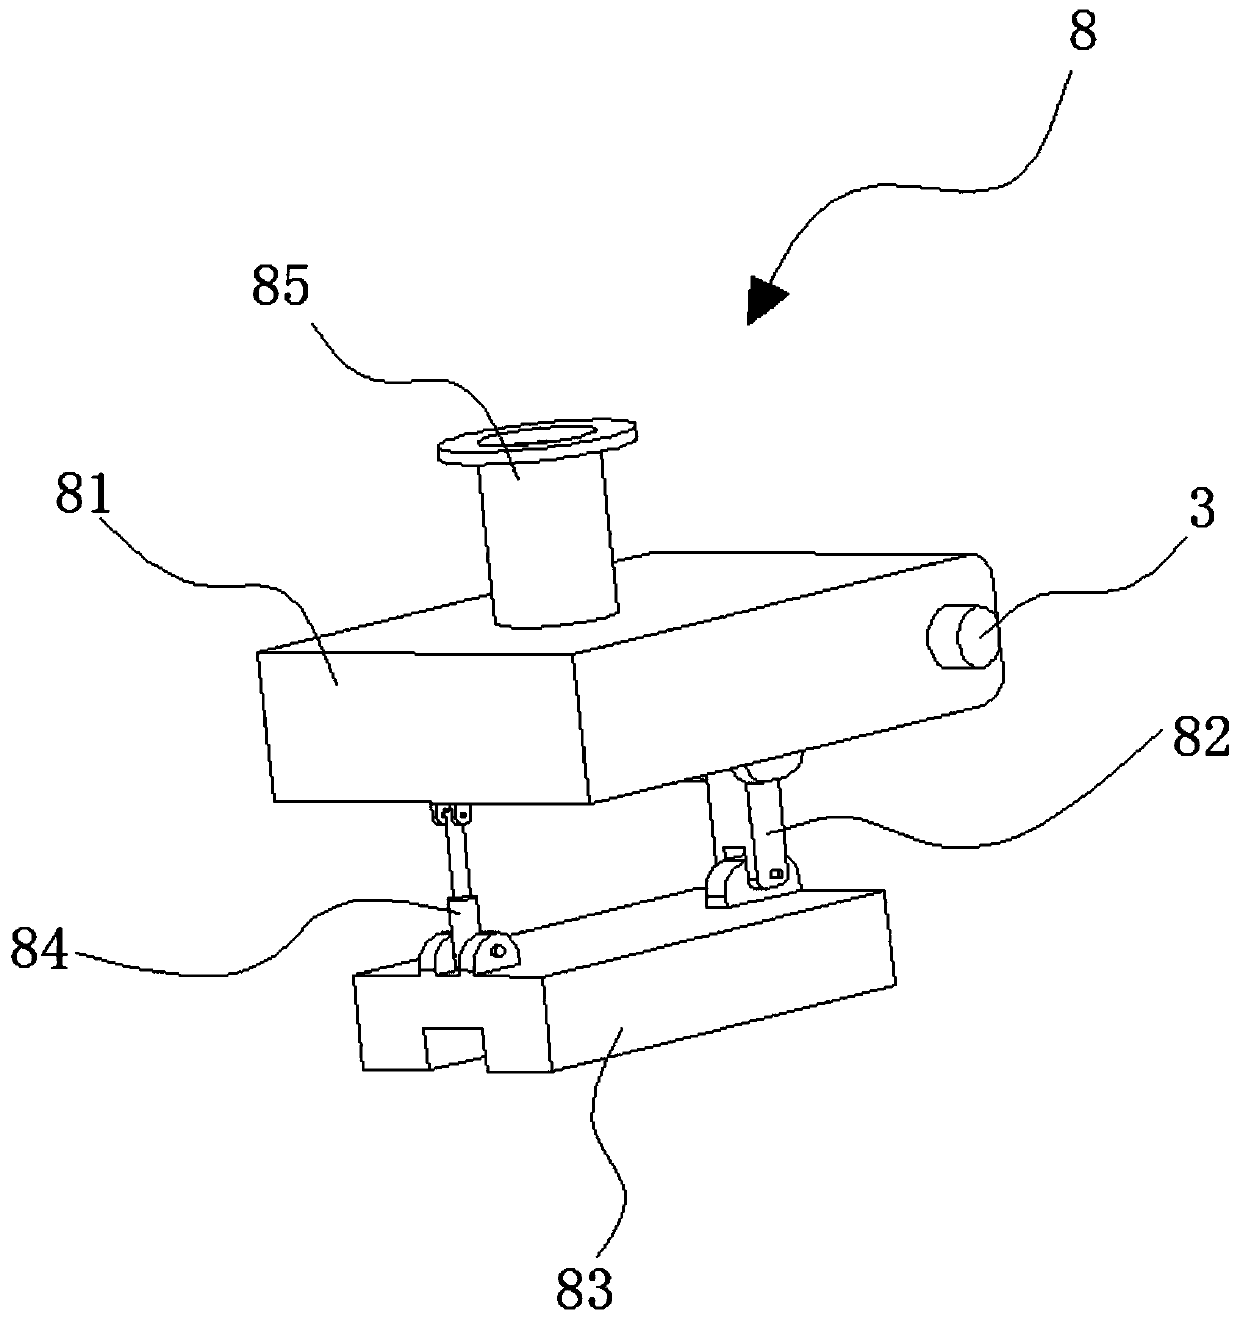 Jacking-back device of discharging opening of intermediate frequency furnace